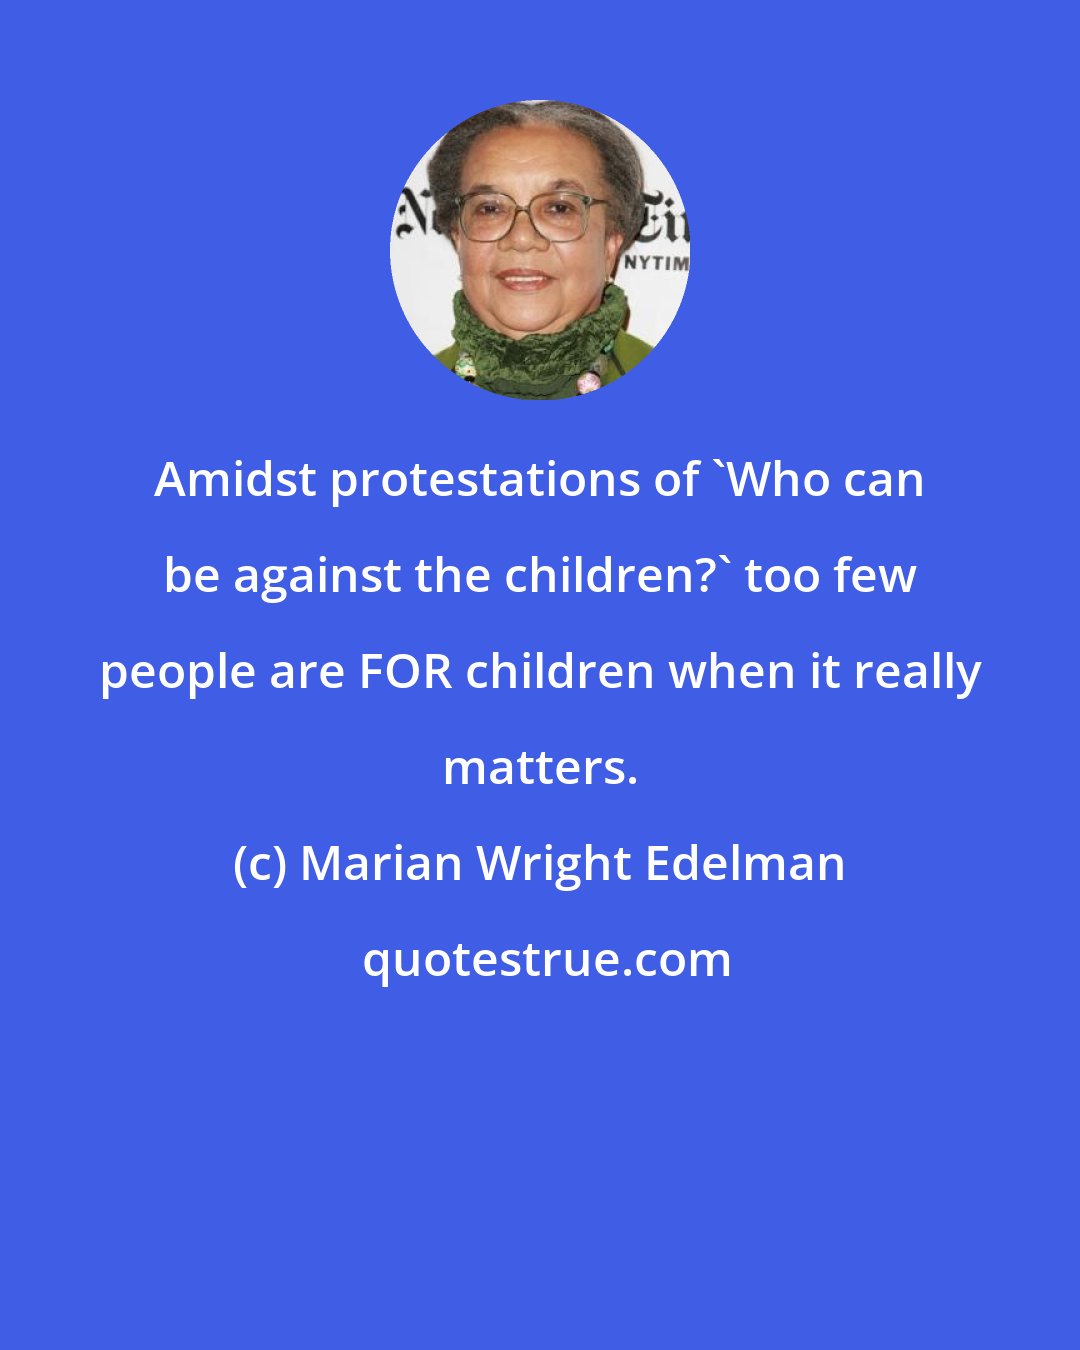 Marian Wright Edelman: Amidst protestations of 'Who can be against the children?' too few people are FOR children when it really matters.